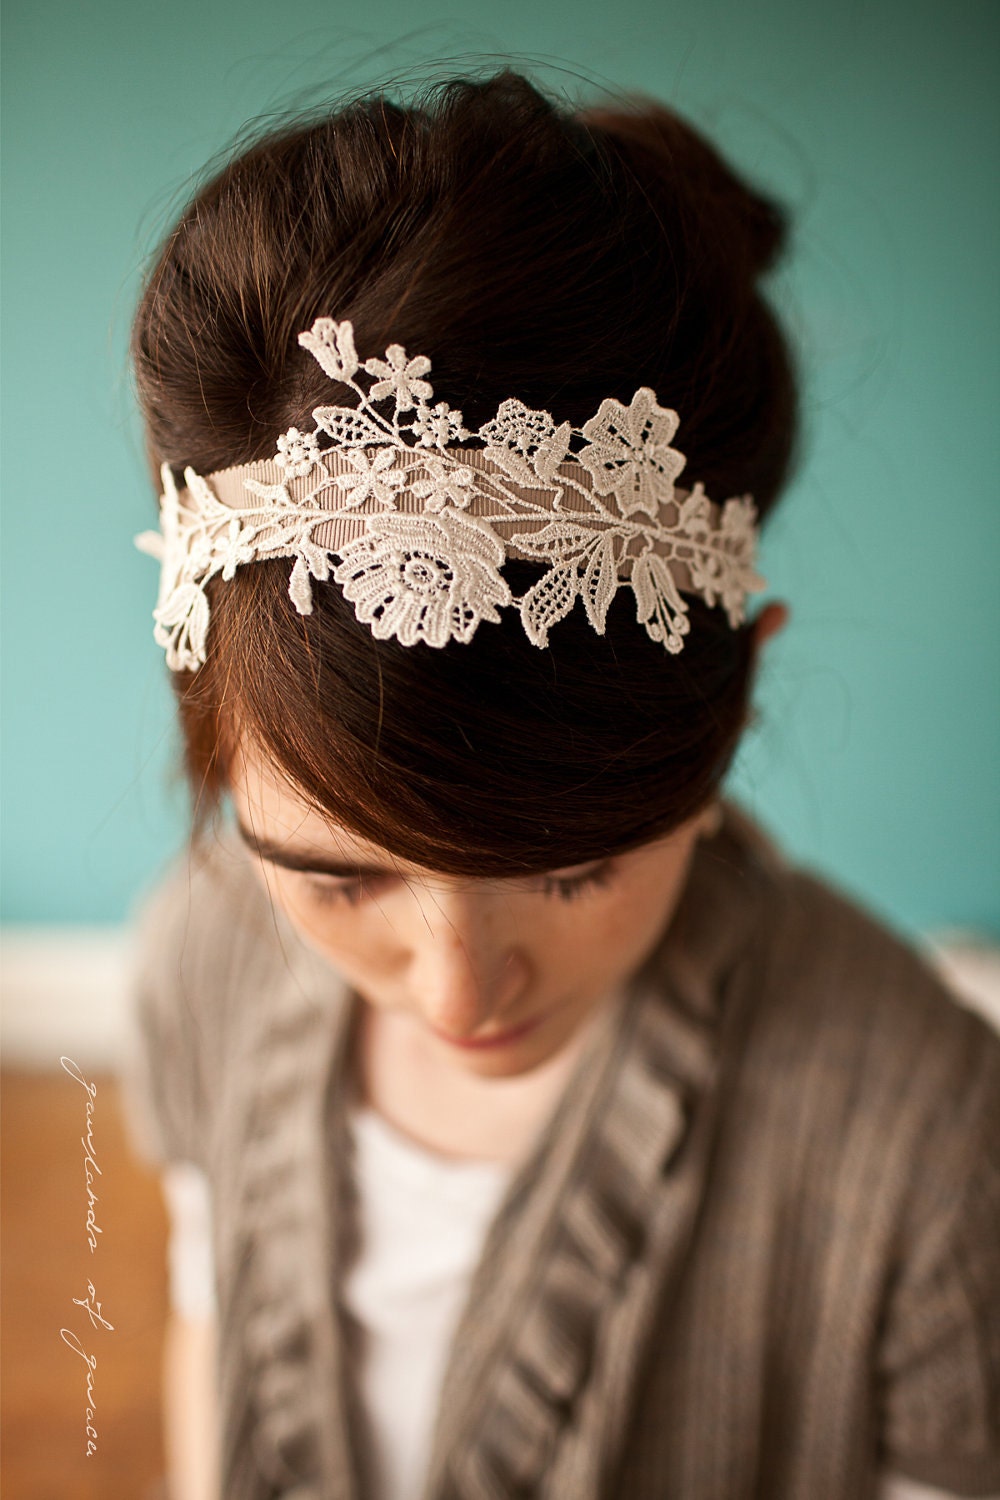 Delicate lattice headband in lace - garlands of grace Something special headband 2012